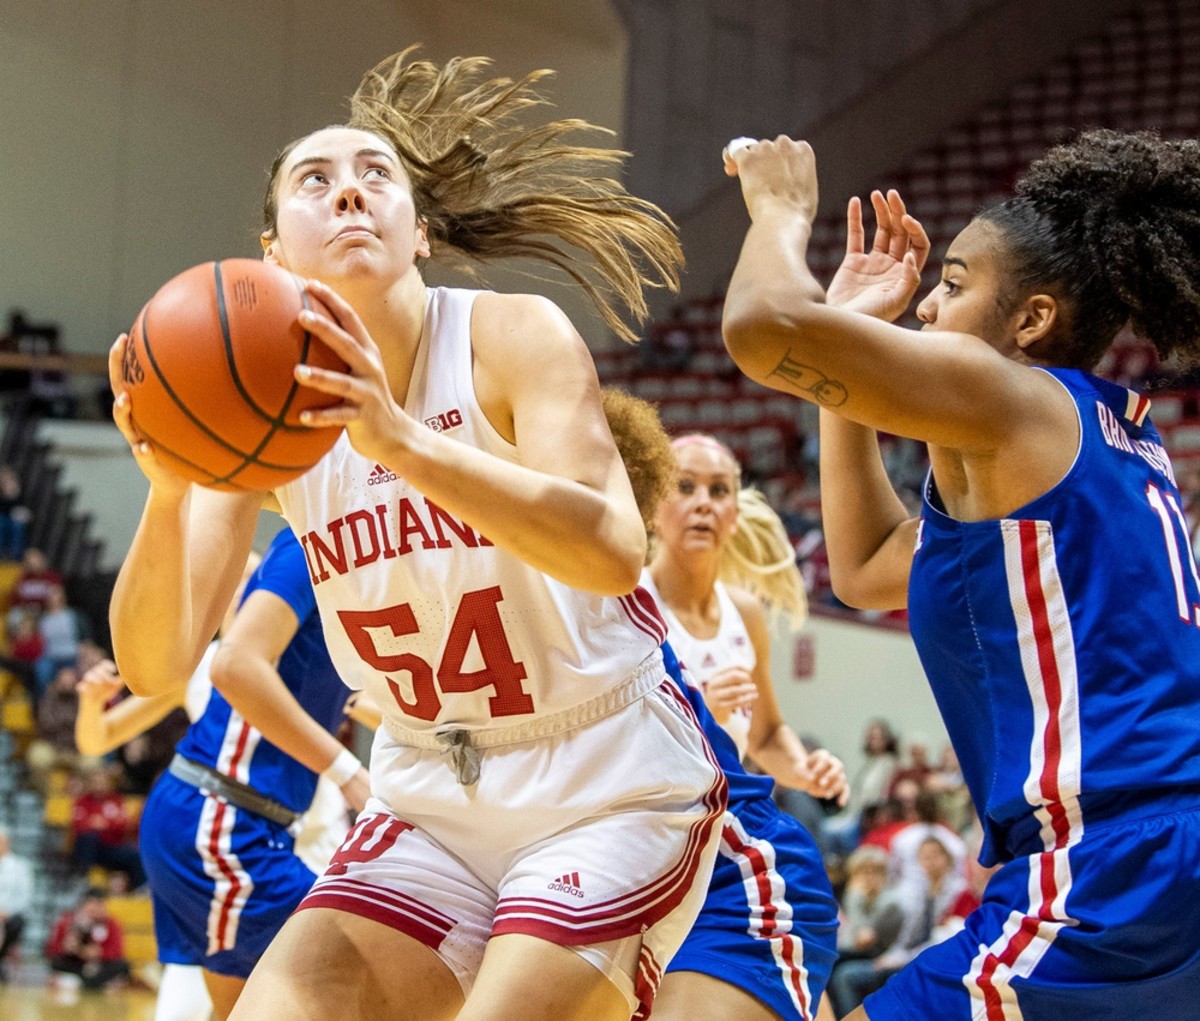 Indiana's Mackenzie Holmes (54) scores during the first half of the Indiana versus UMass Lowell women's basketball game at Simon Skjodt Assembly Hall on Friday, Nov. 11, 2022.